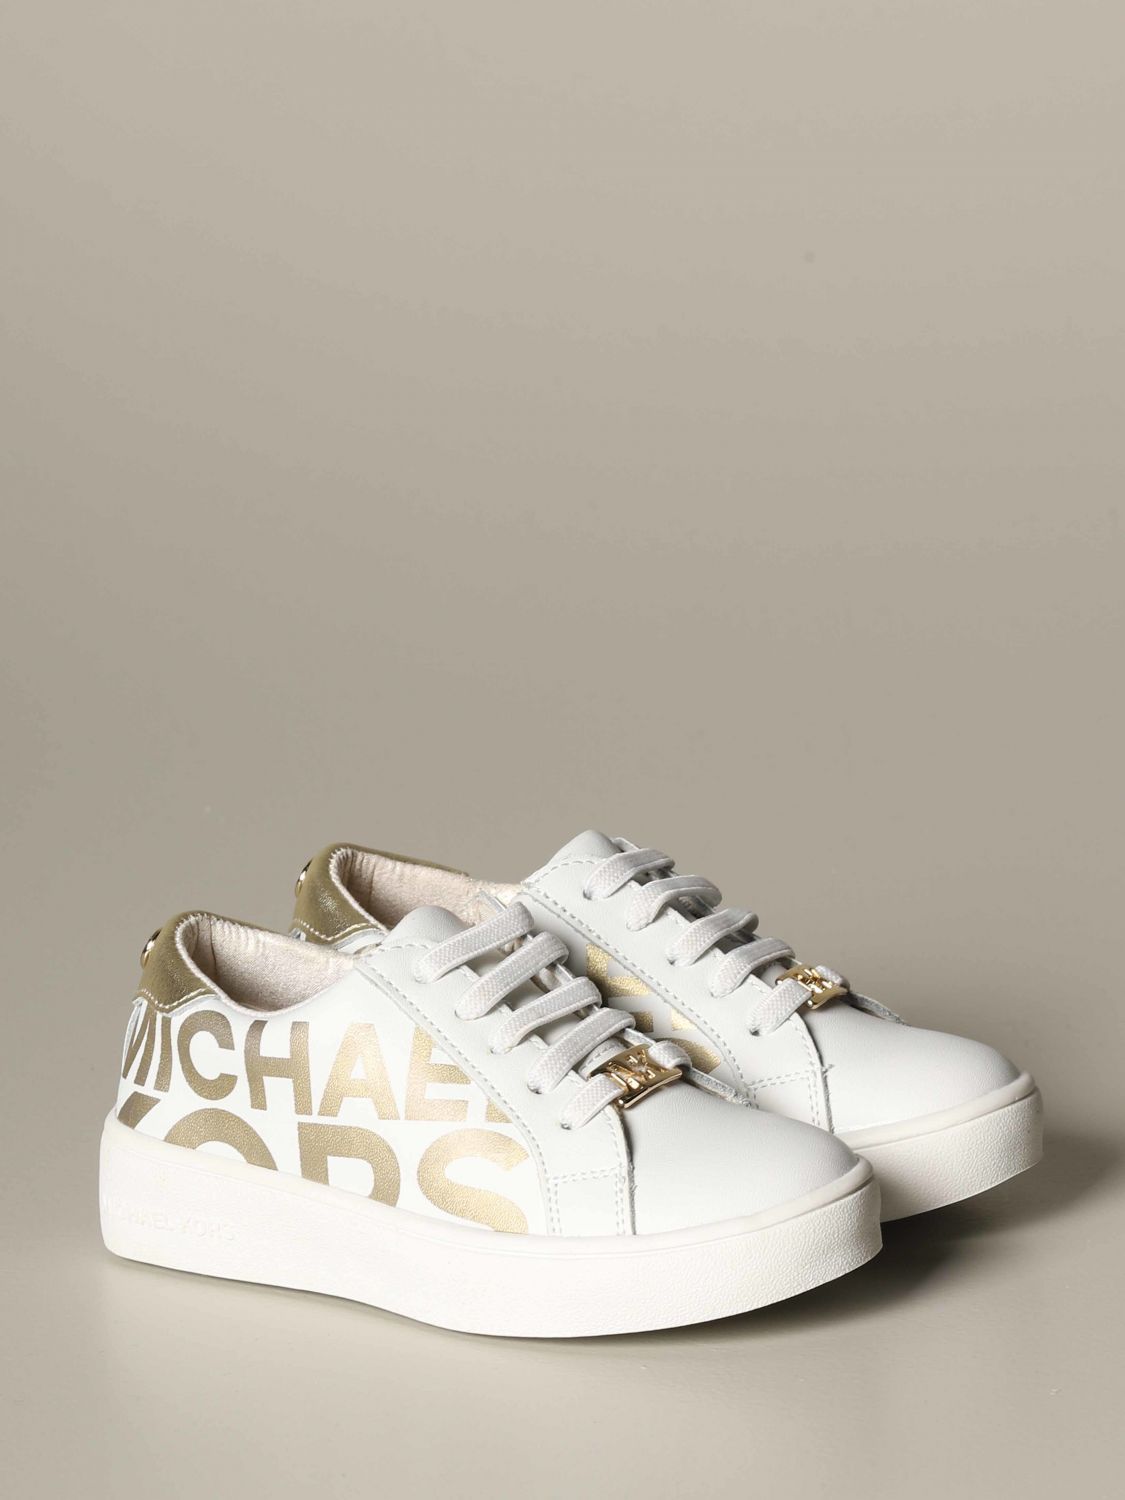 michael kors shoes for toddlers